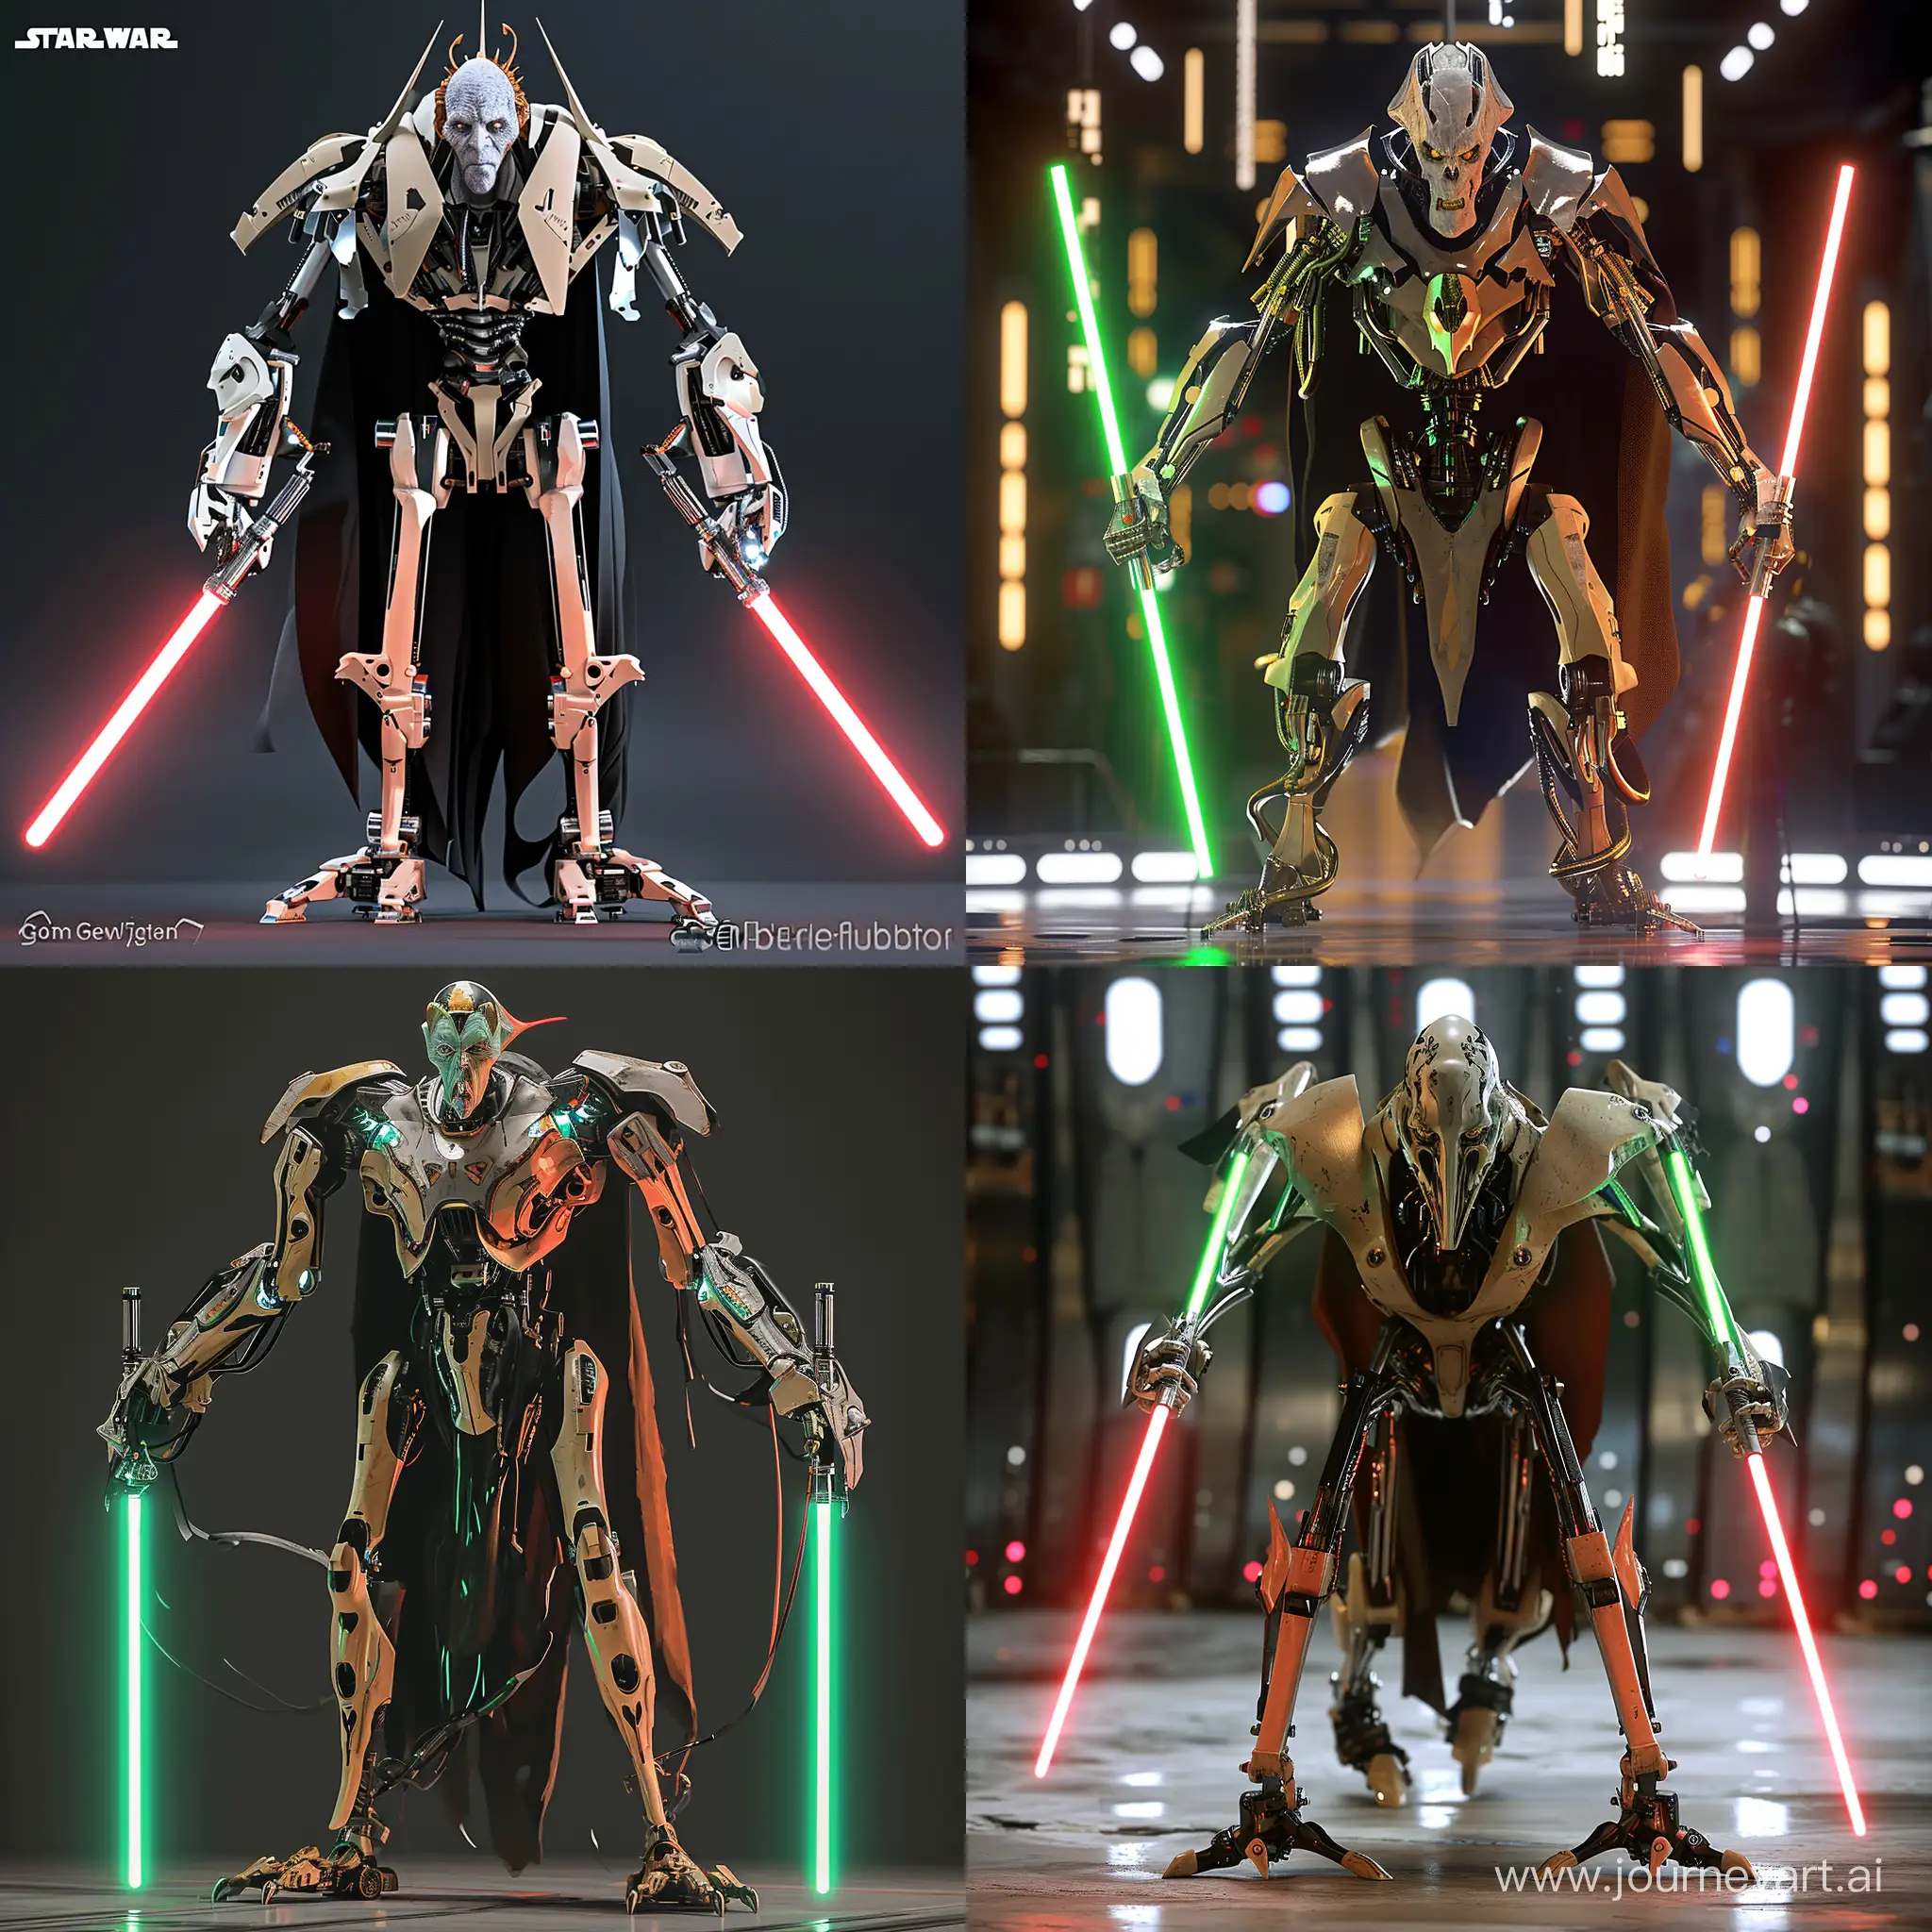 Generate an updated image of General Grievous for a hypothetical remake of the Star Wars franchise, featuring Benedict Cumberbatch as the voice actor. Embody the menacing and cybernetic presence of General Grievous, ensuring a modern and realistic interpretation. Pay attention to the details of Grievous's robotic limbs, lightsabers, and the overall design while incorporating elements that reflect Benedict Cumberbatch's vocal portrayal. Create an image that captures the essence of General Grievous with a fresh and contemporary take, highlighting both the visual and auditory aspects of the character in this hypothetical remake.